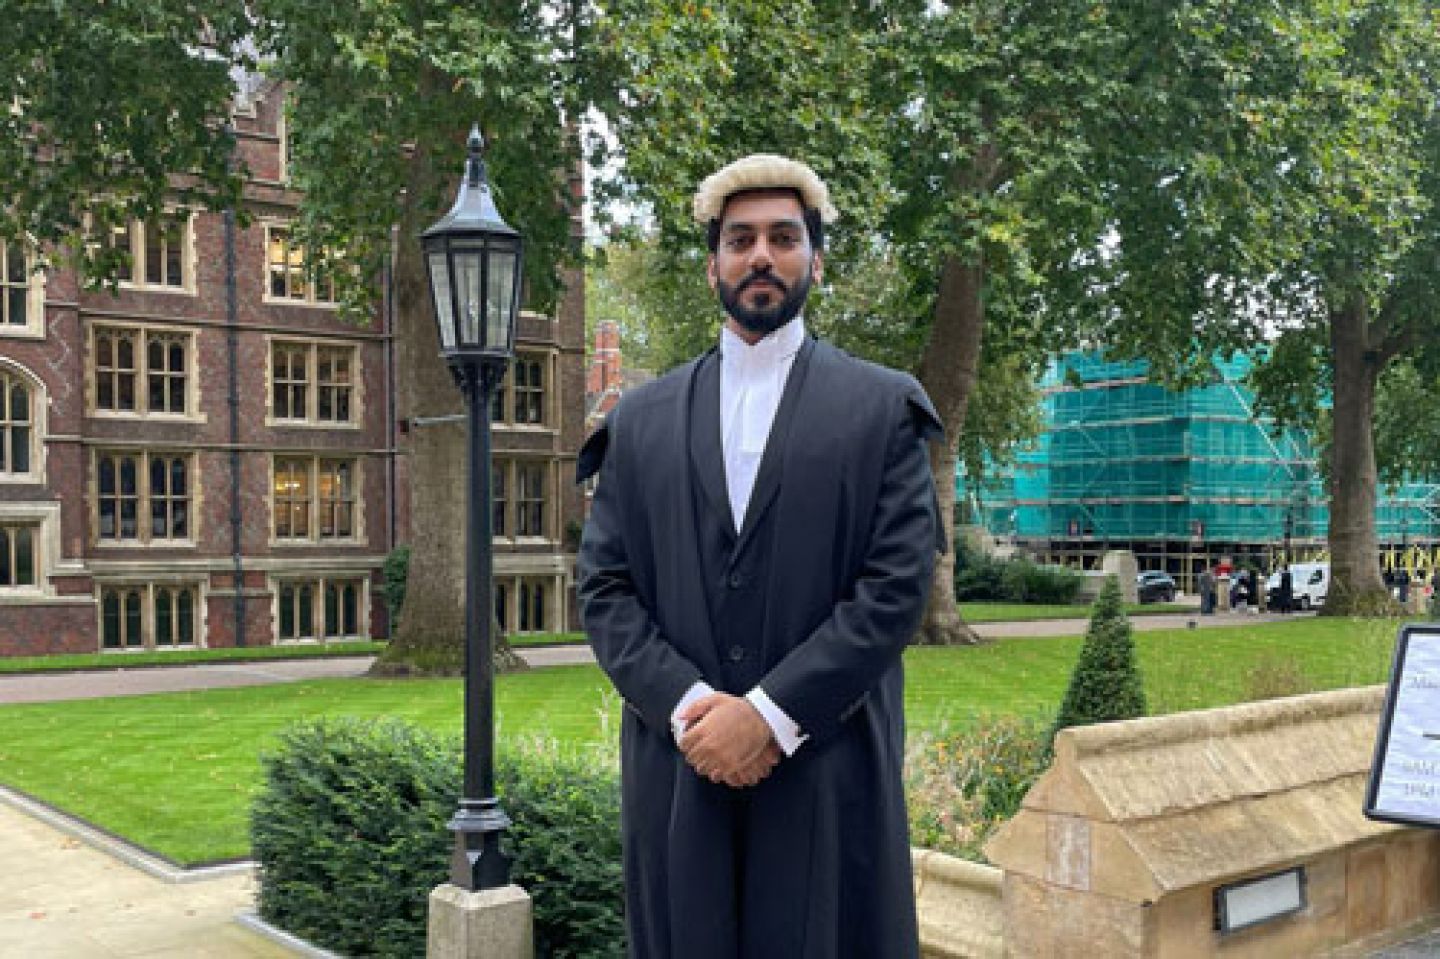 Abdul Qudoos Sohal (LLB Law 2020) dons the classic tie wig as he is called to the Bar.